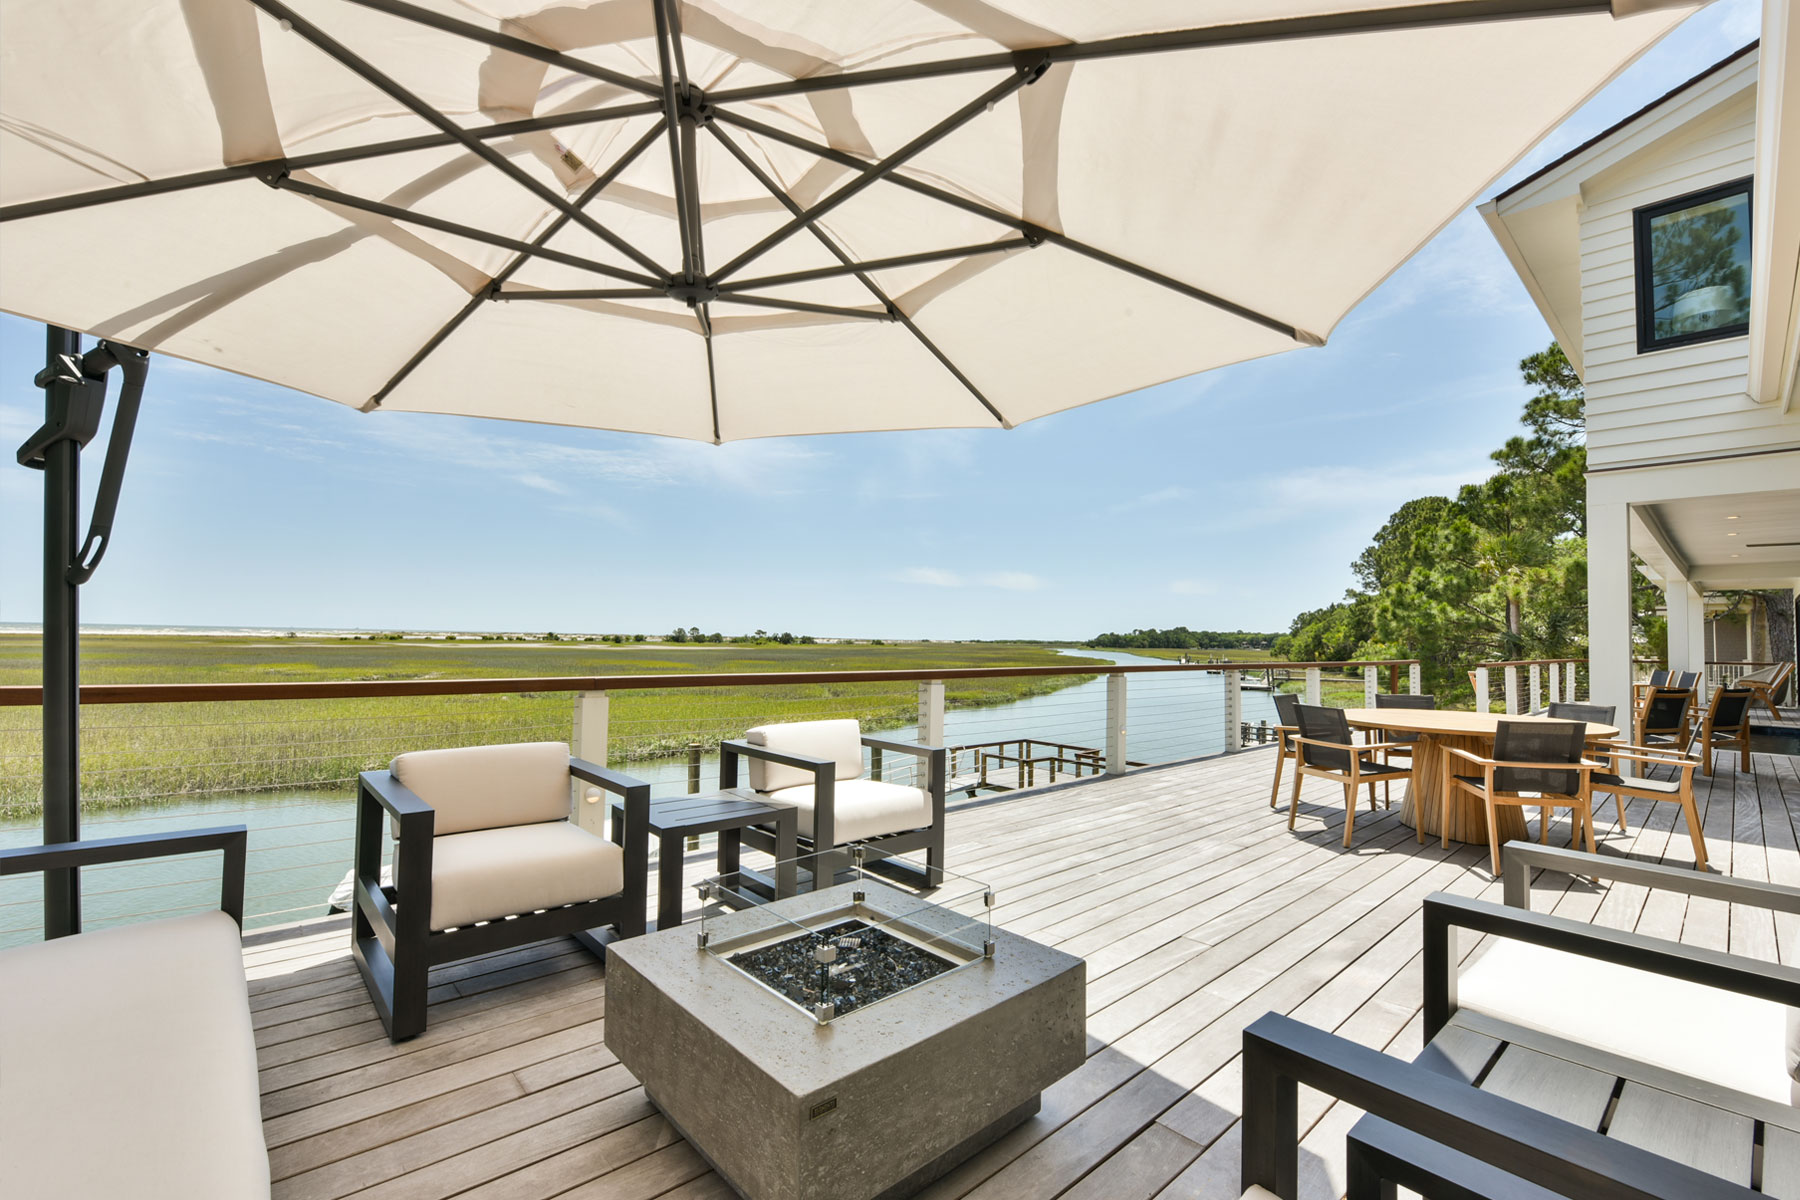 Elevated outdoor deck withlarge lounge, dining, and pool with marsh views